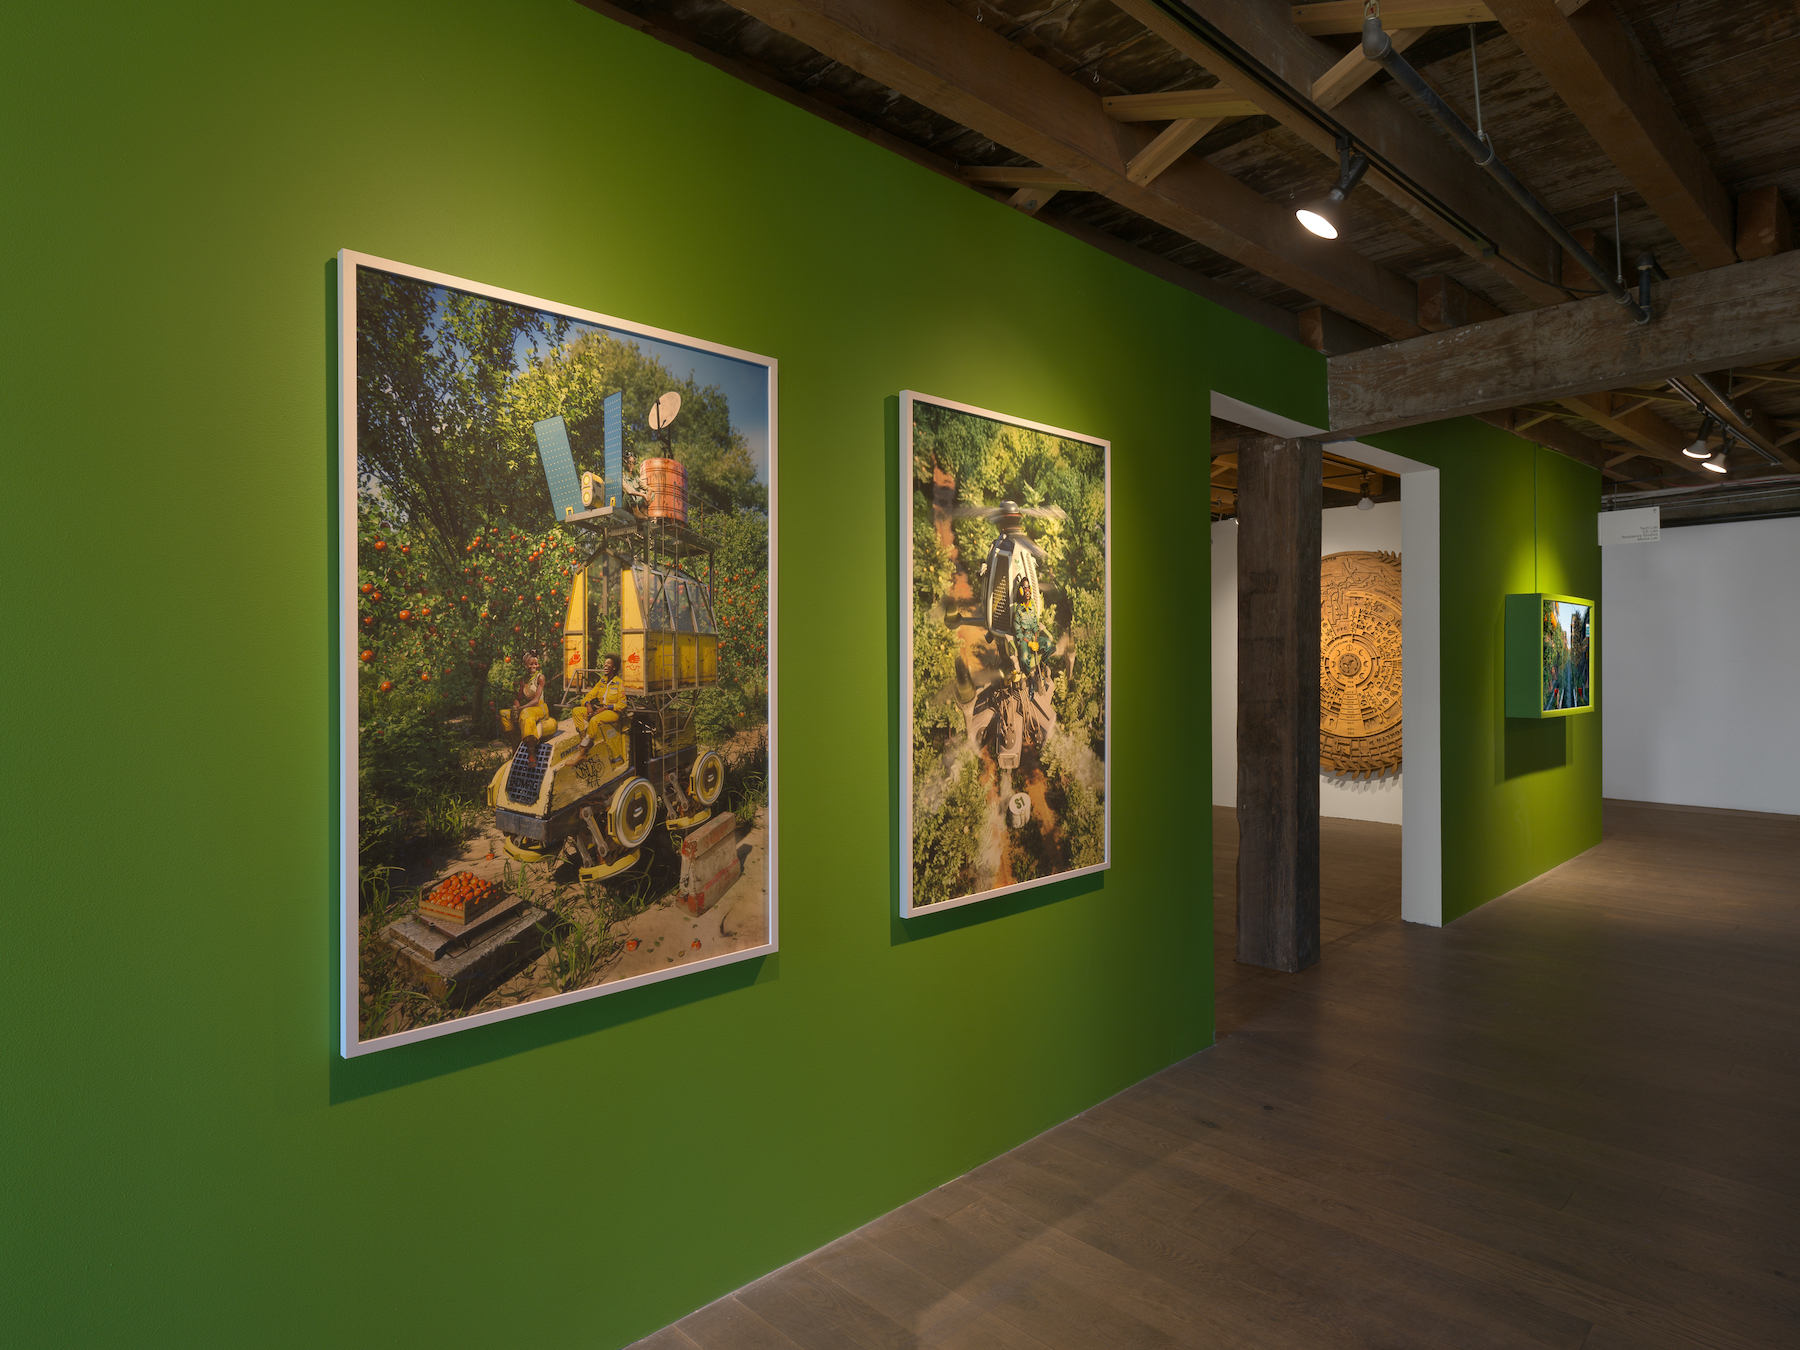 A green wall adorned with paintings of gardens and garden tools.